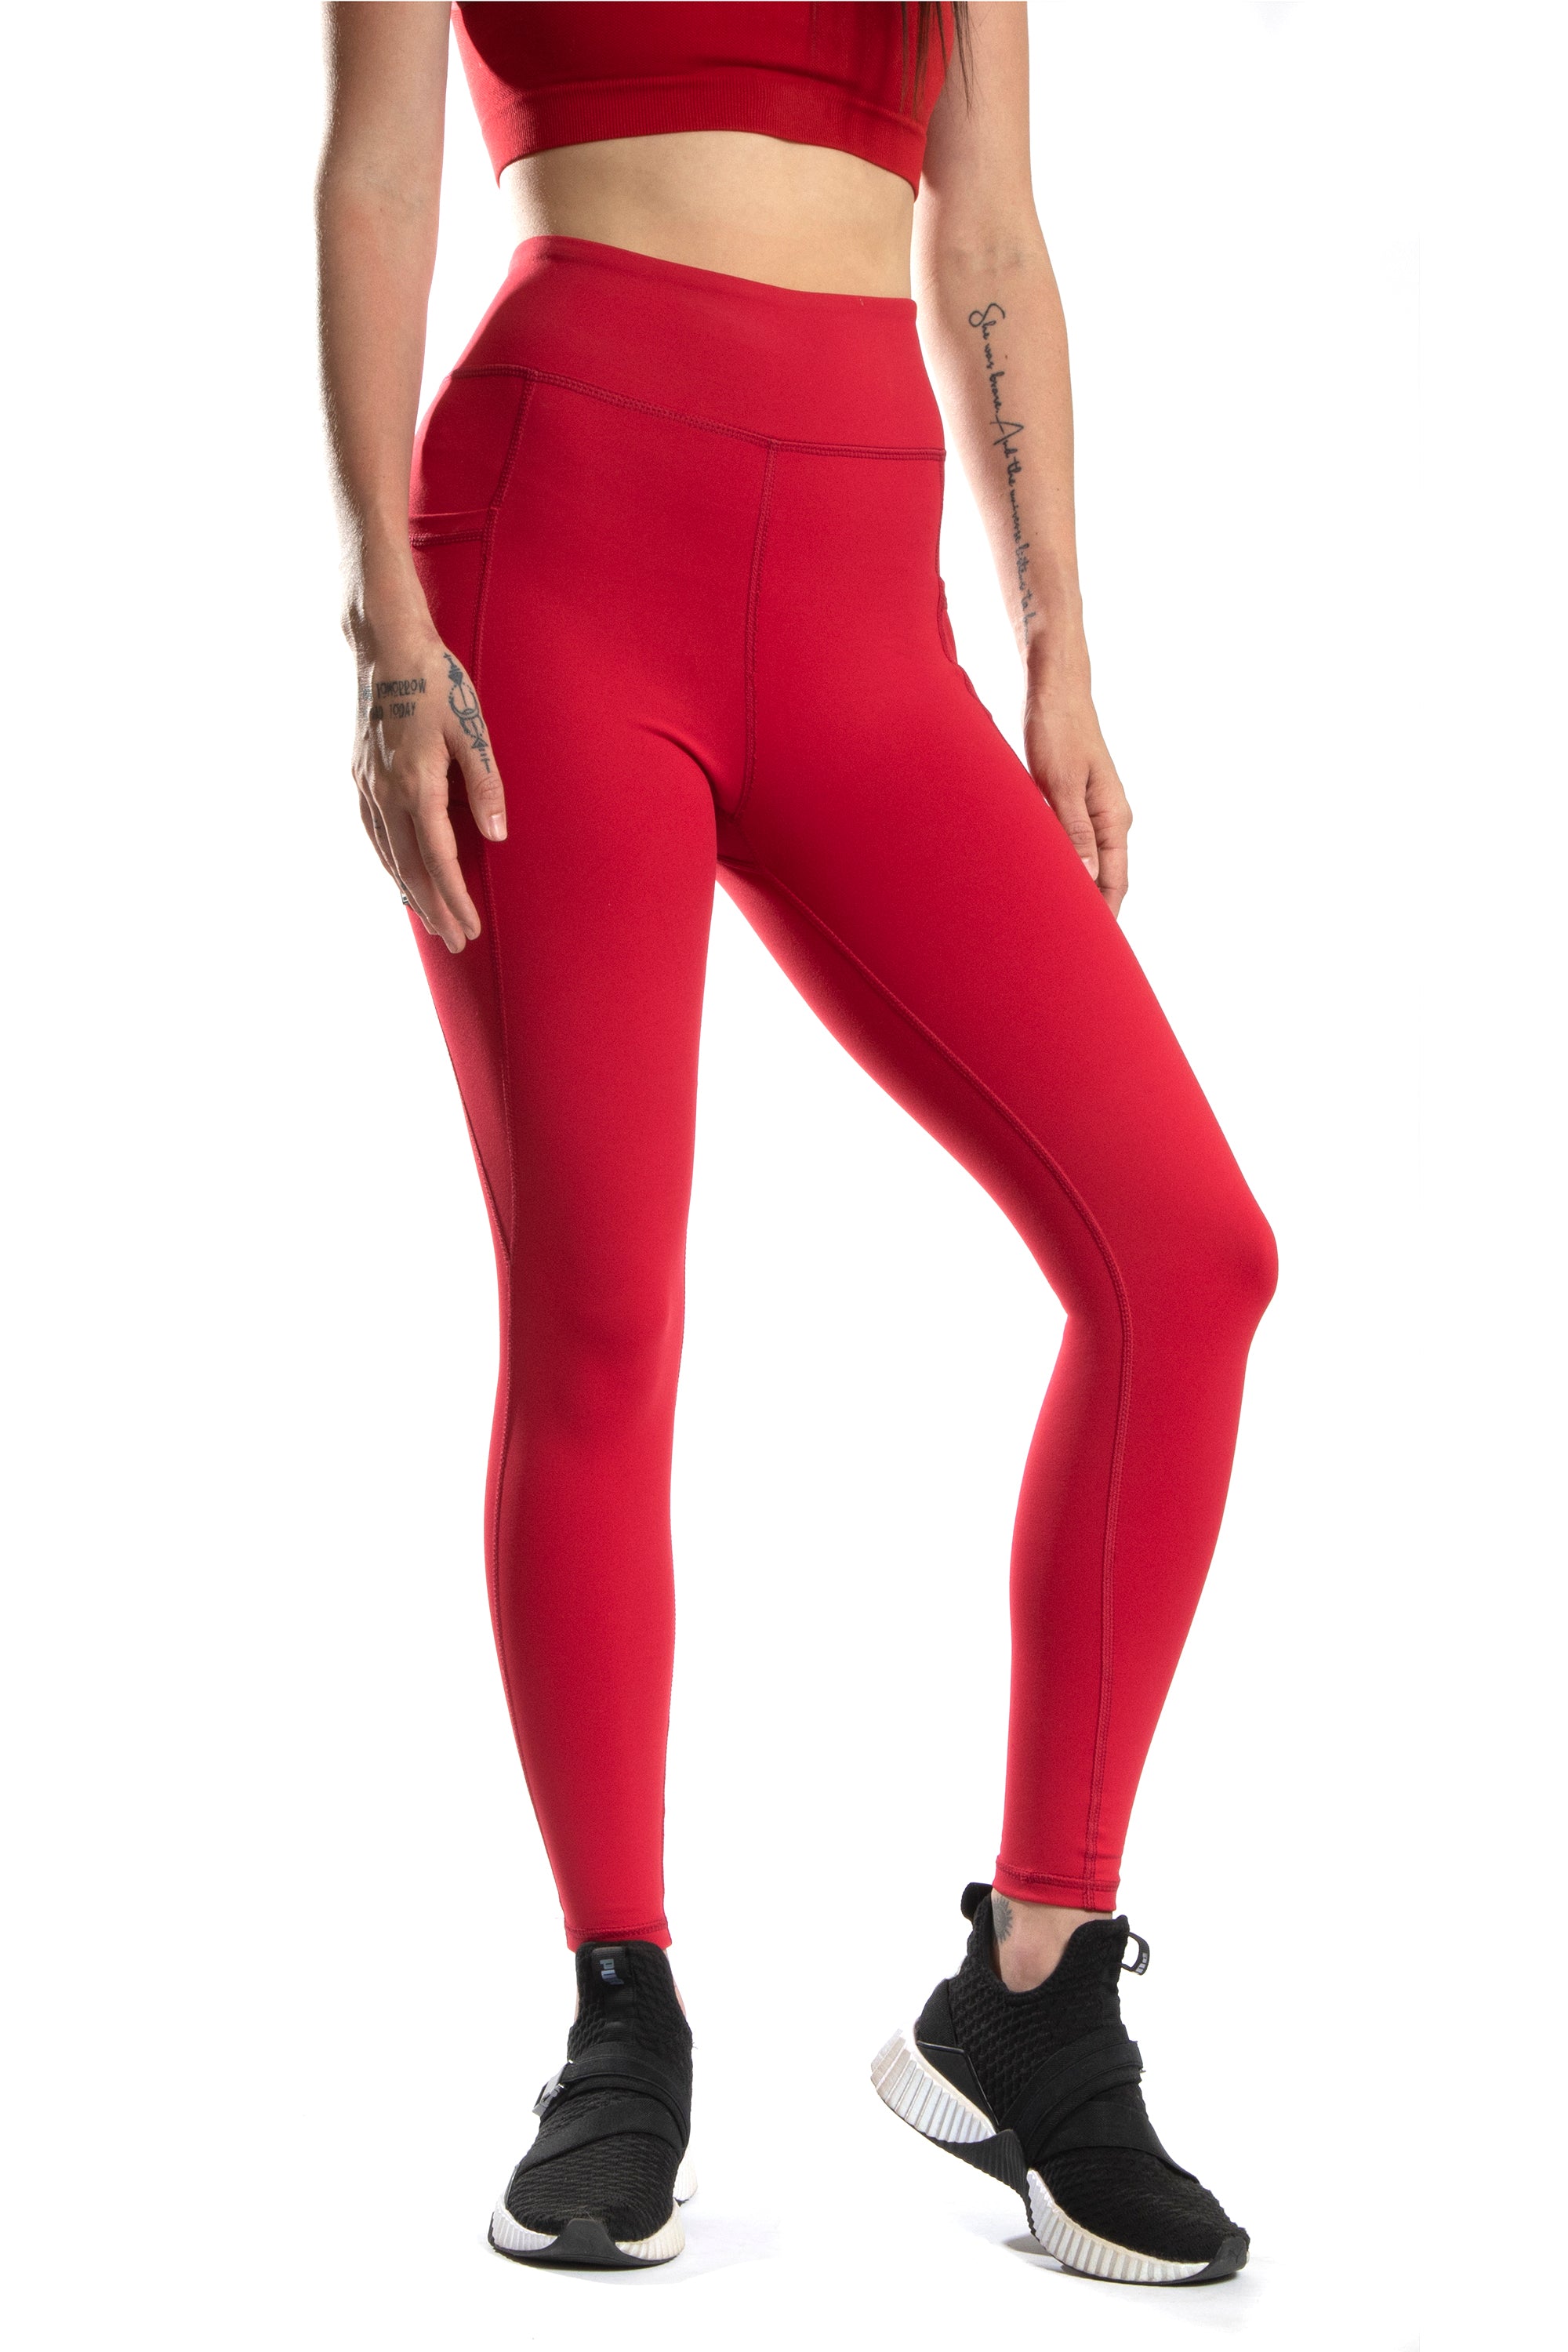 Rounded Concealed Carry Leggings Red CEX-LEGNS-BG-RH-XLG - Online Outfitters